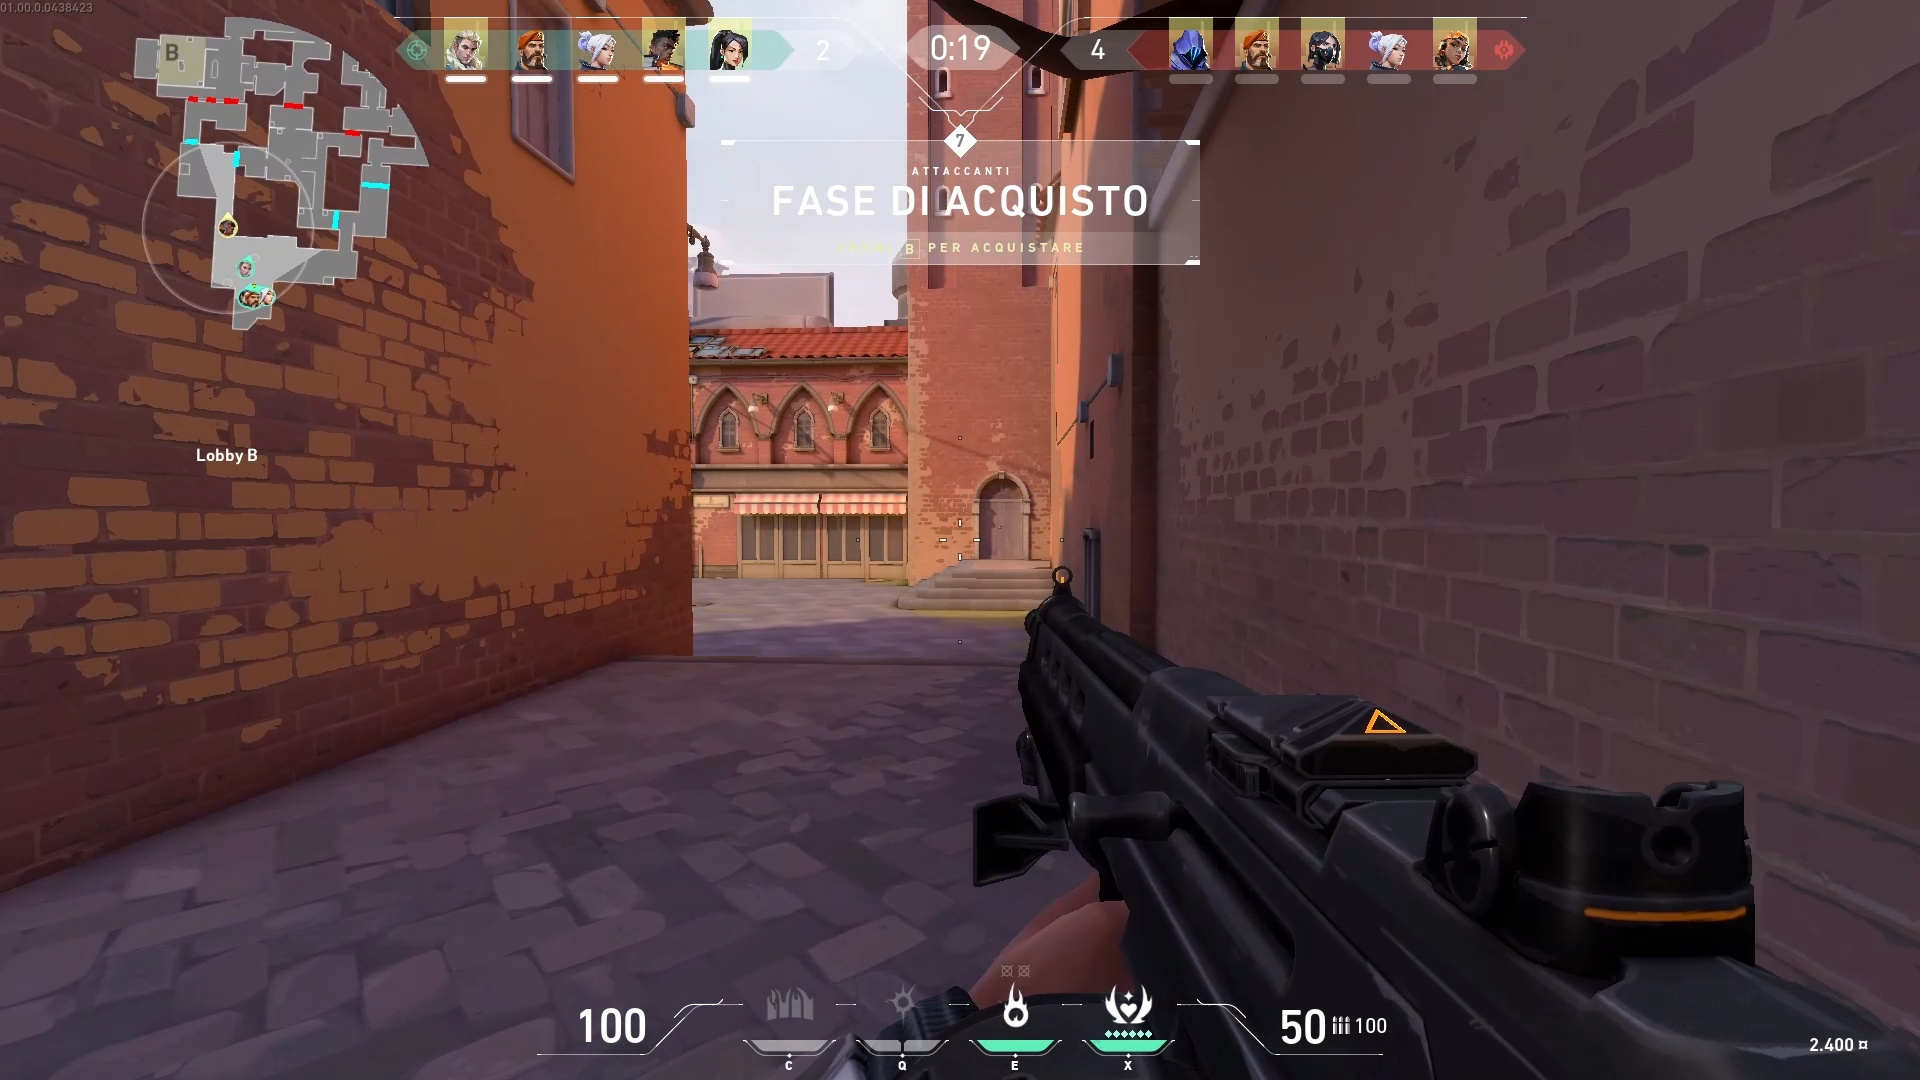 Media asset in full size related to 3dfxzone.it news item entitled as follows: Riot Games lancia lo shooter Valorant: guarda il gameplay sul canale di 3dfxzone | Image Name: news30805_Valorant-Full-HD-Screenshot_1.png